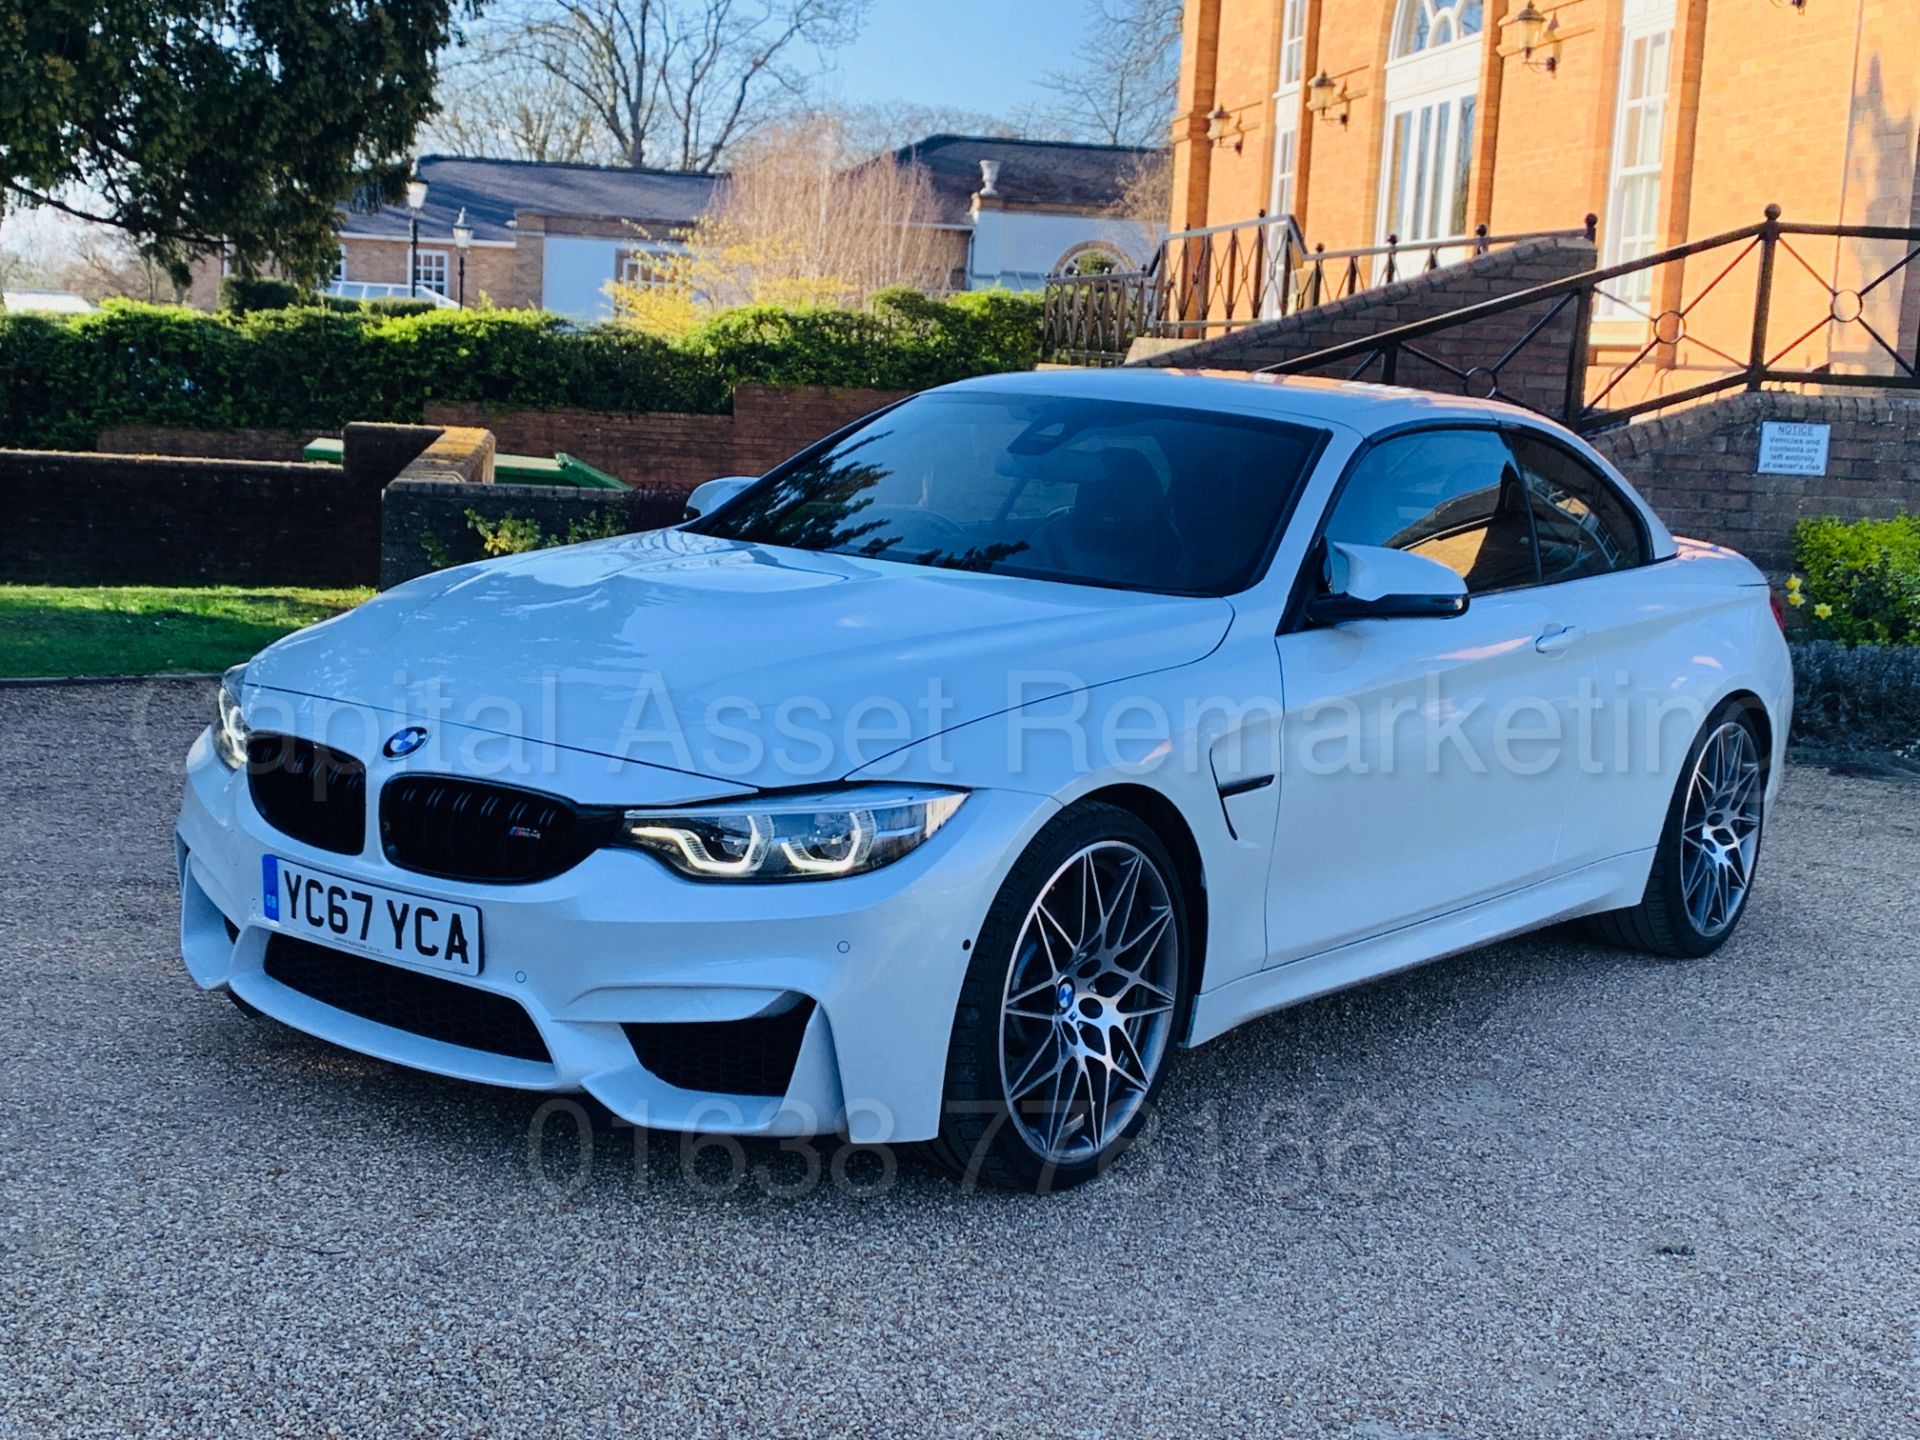 ON SALE BMW M4 CONVERTIBLE *COMPETITION PACKAGE* (2018 MODEL) '431 BHP - M DCT AUTO' WOW!!!!! - Image 4 of 89